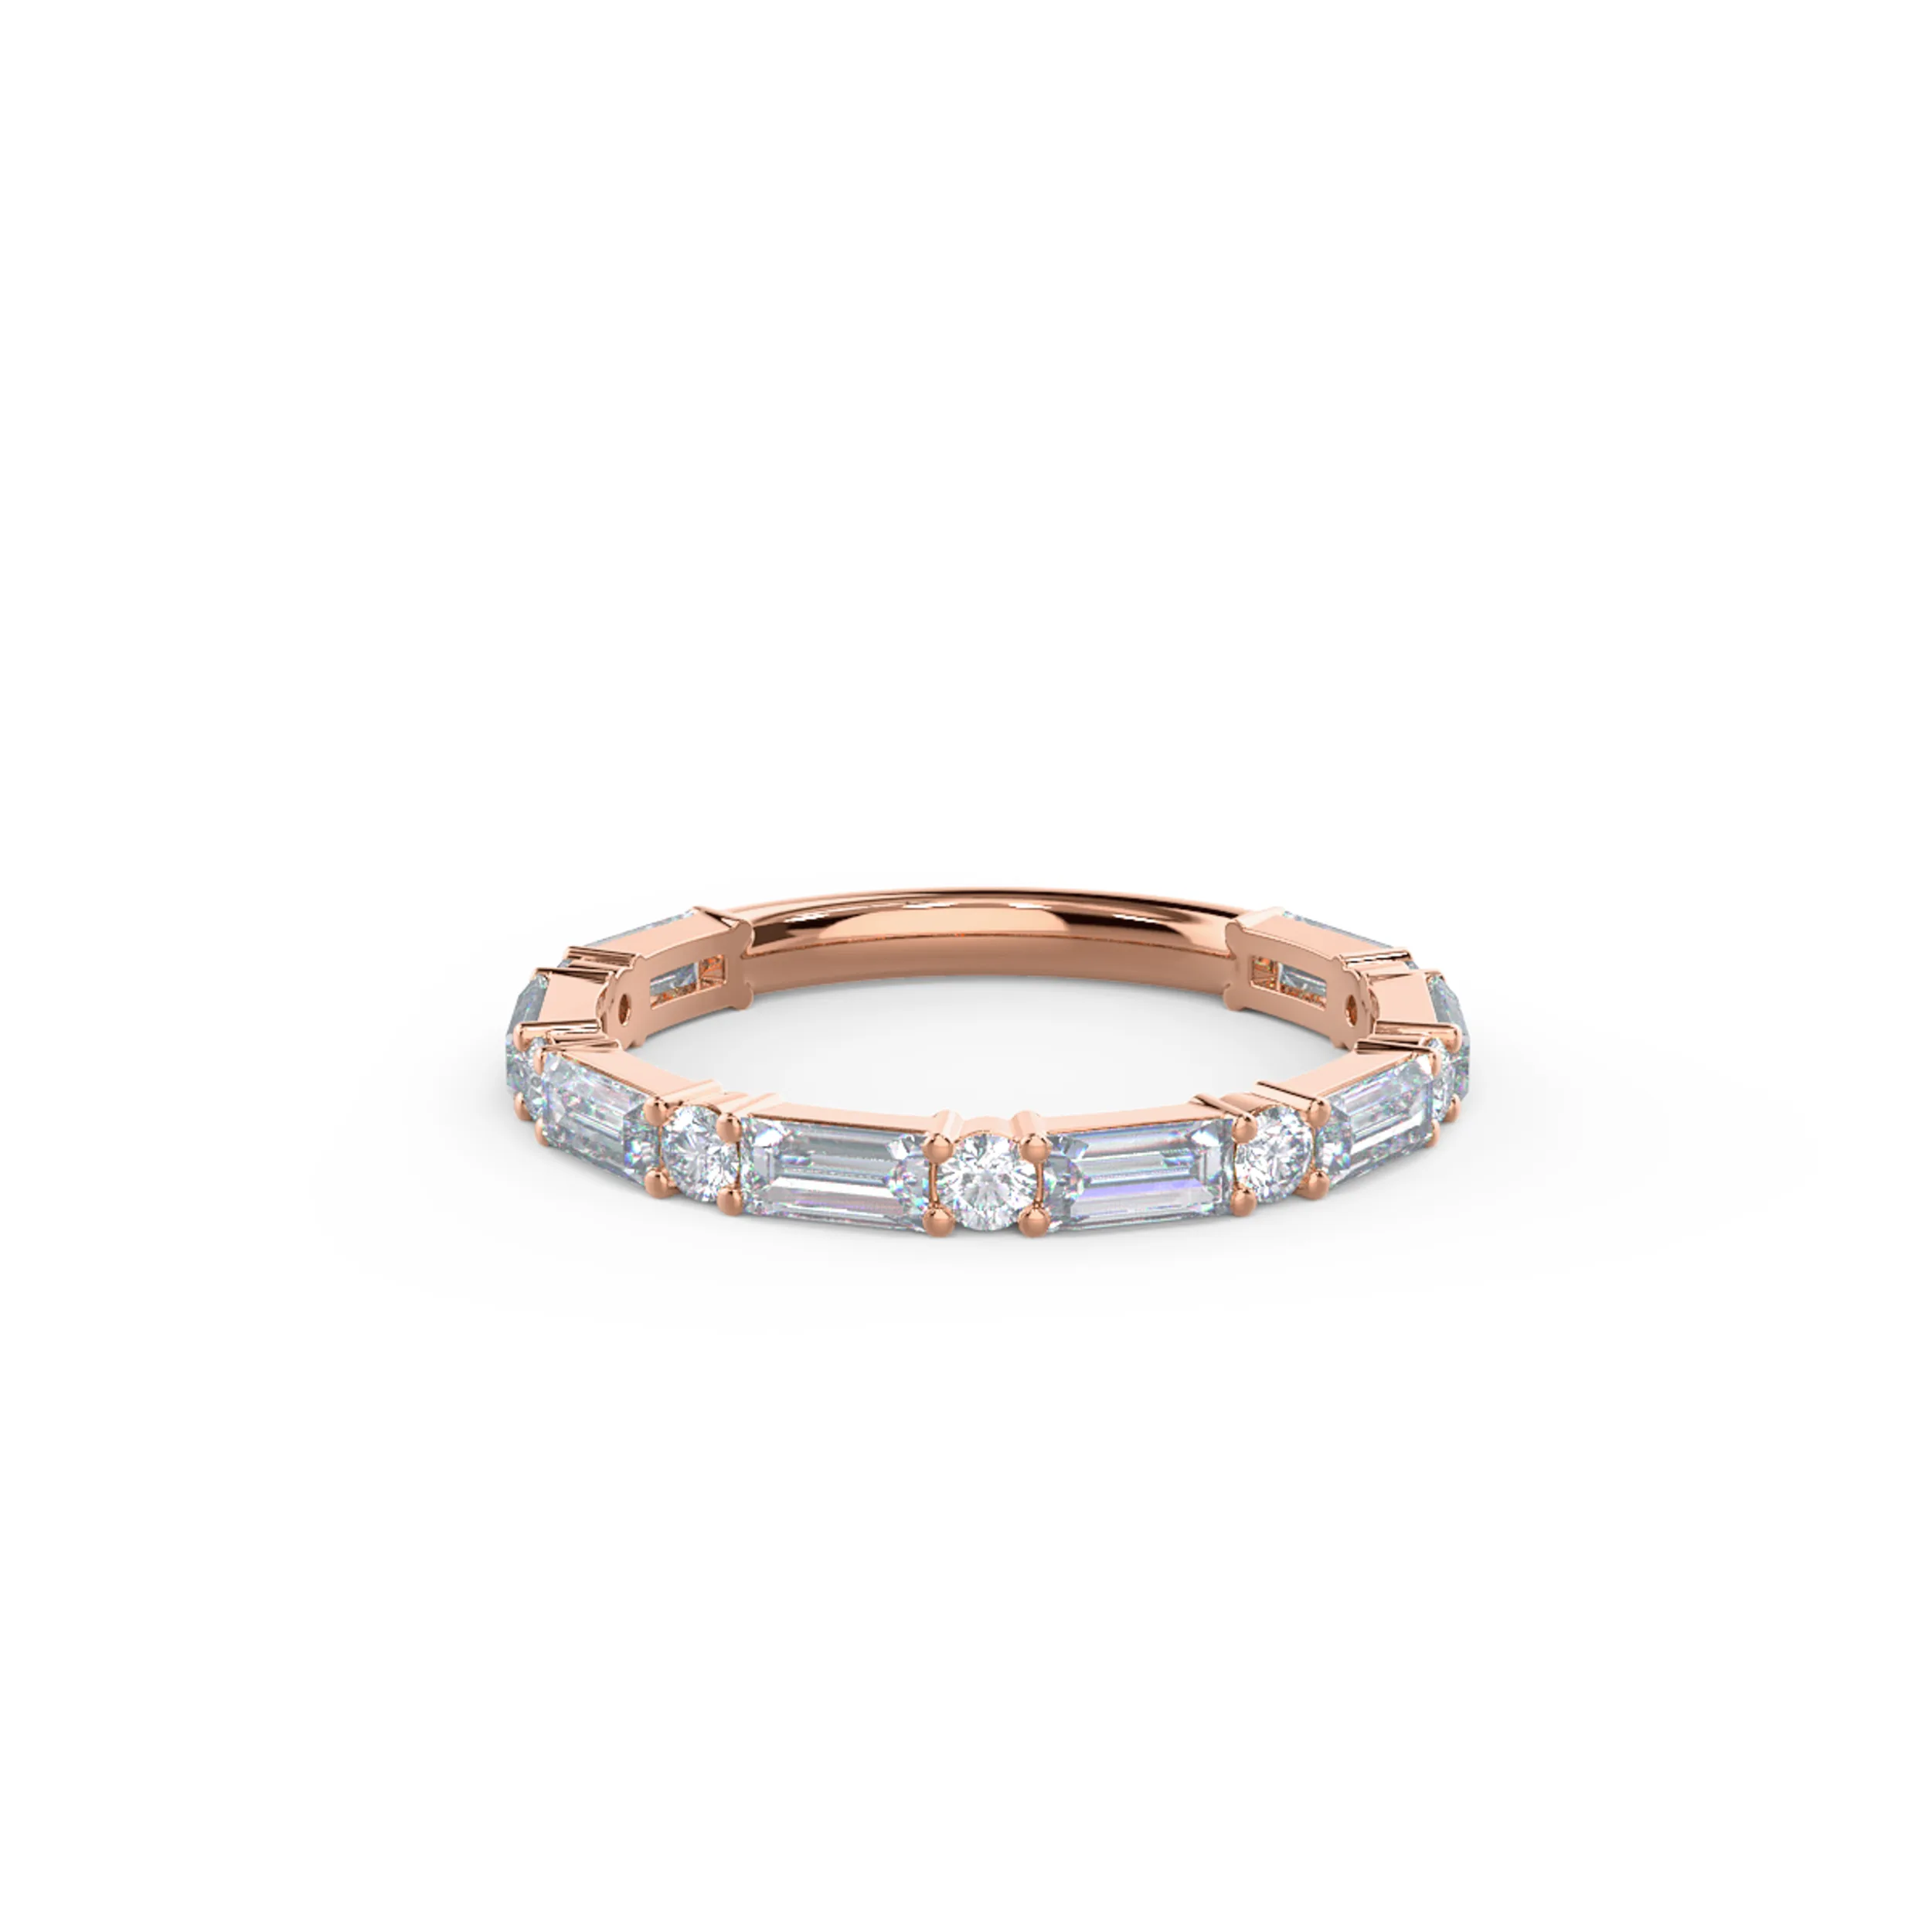 Exceptional Quality 1.0 Carat Diamonds set in 14k Rose Gold Baguette and Round Three Quarter Band (Main View)